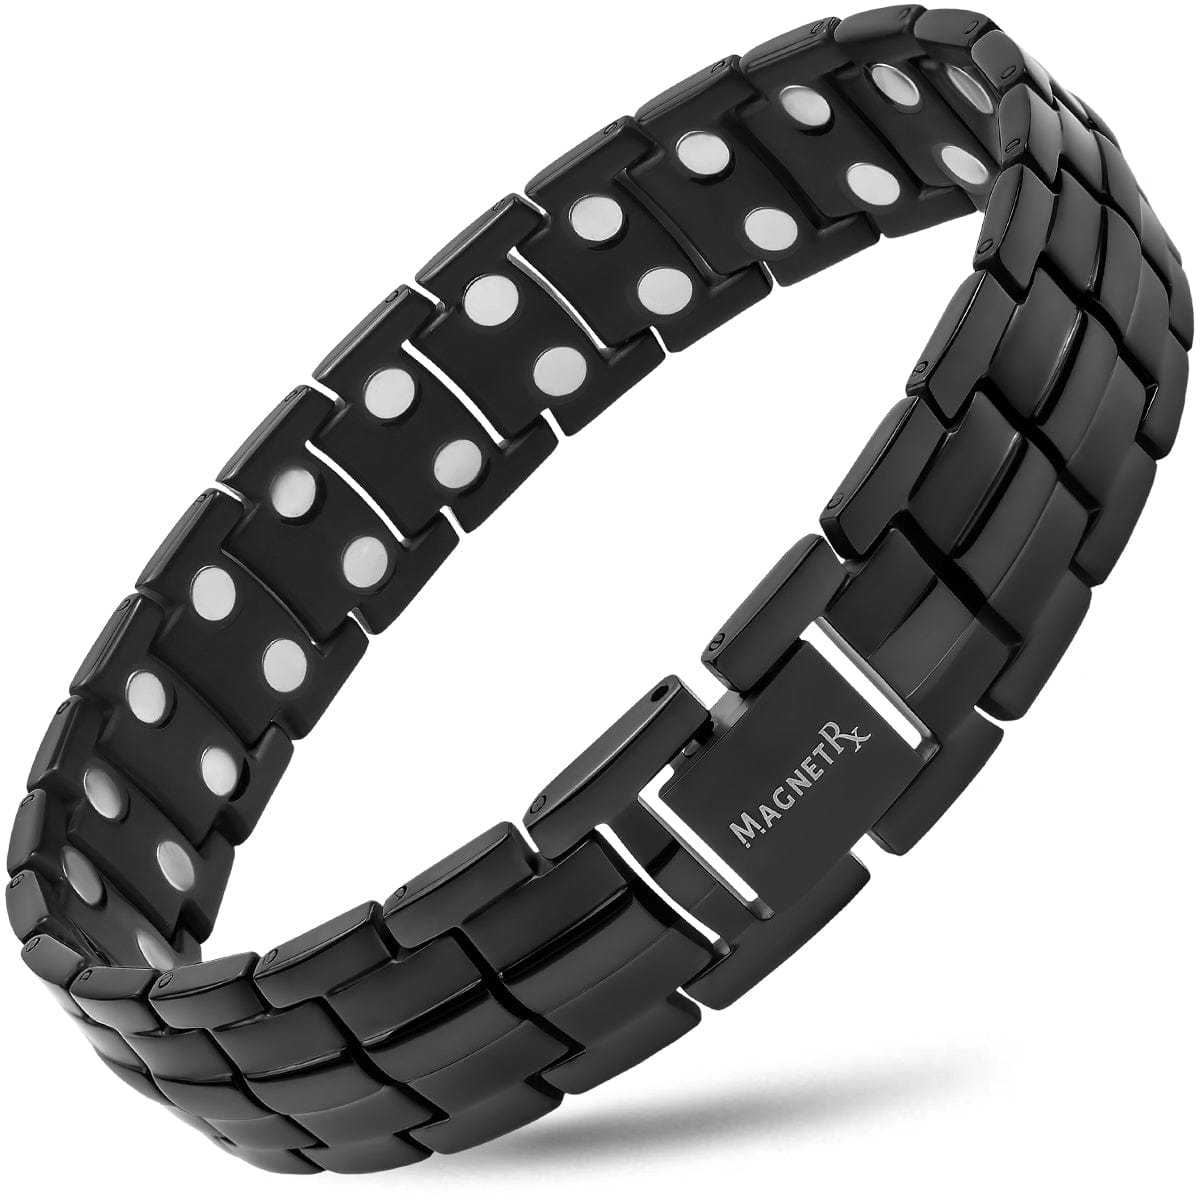 Stainless Steel Magnetic Bracelets Benefits Health Energy Wrist Band Couple  Bracelet Metal 11mm Magnetic Therapy Chain Link for Women | Shopee Malaysia